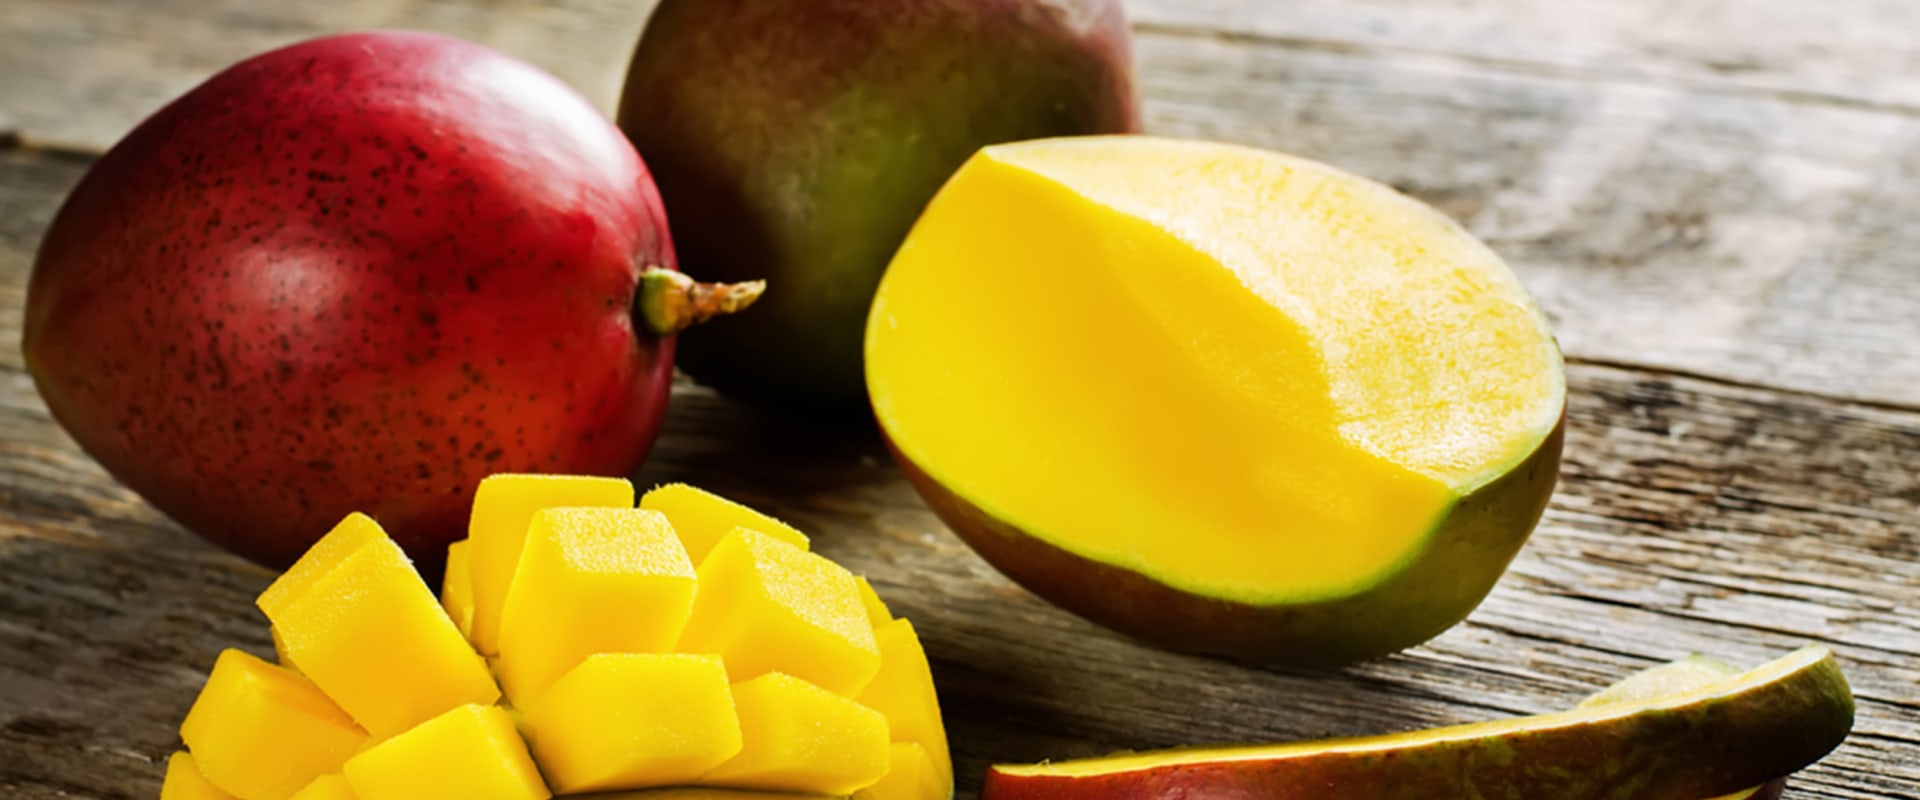 What Color is a Ripe Mango?